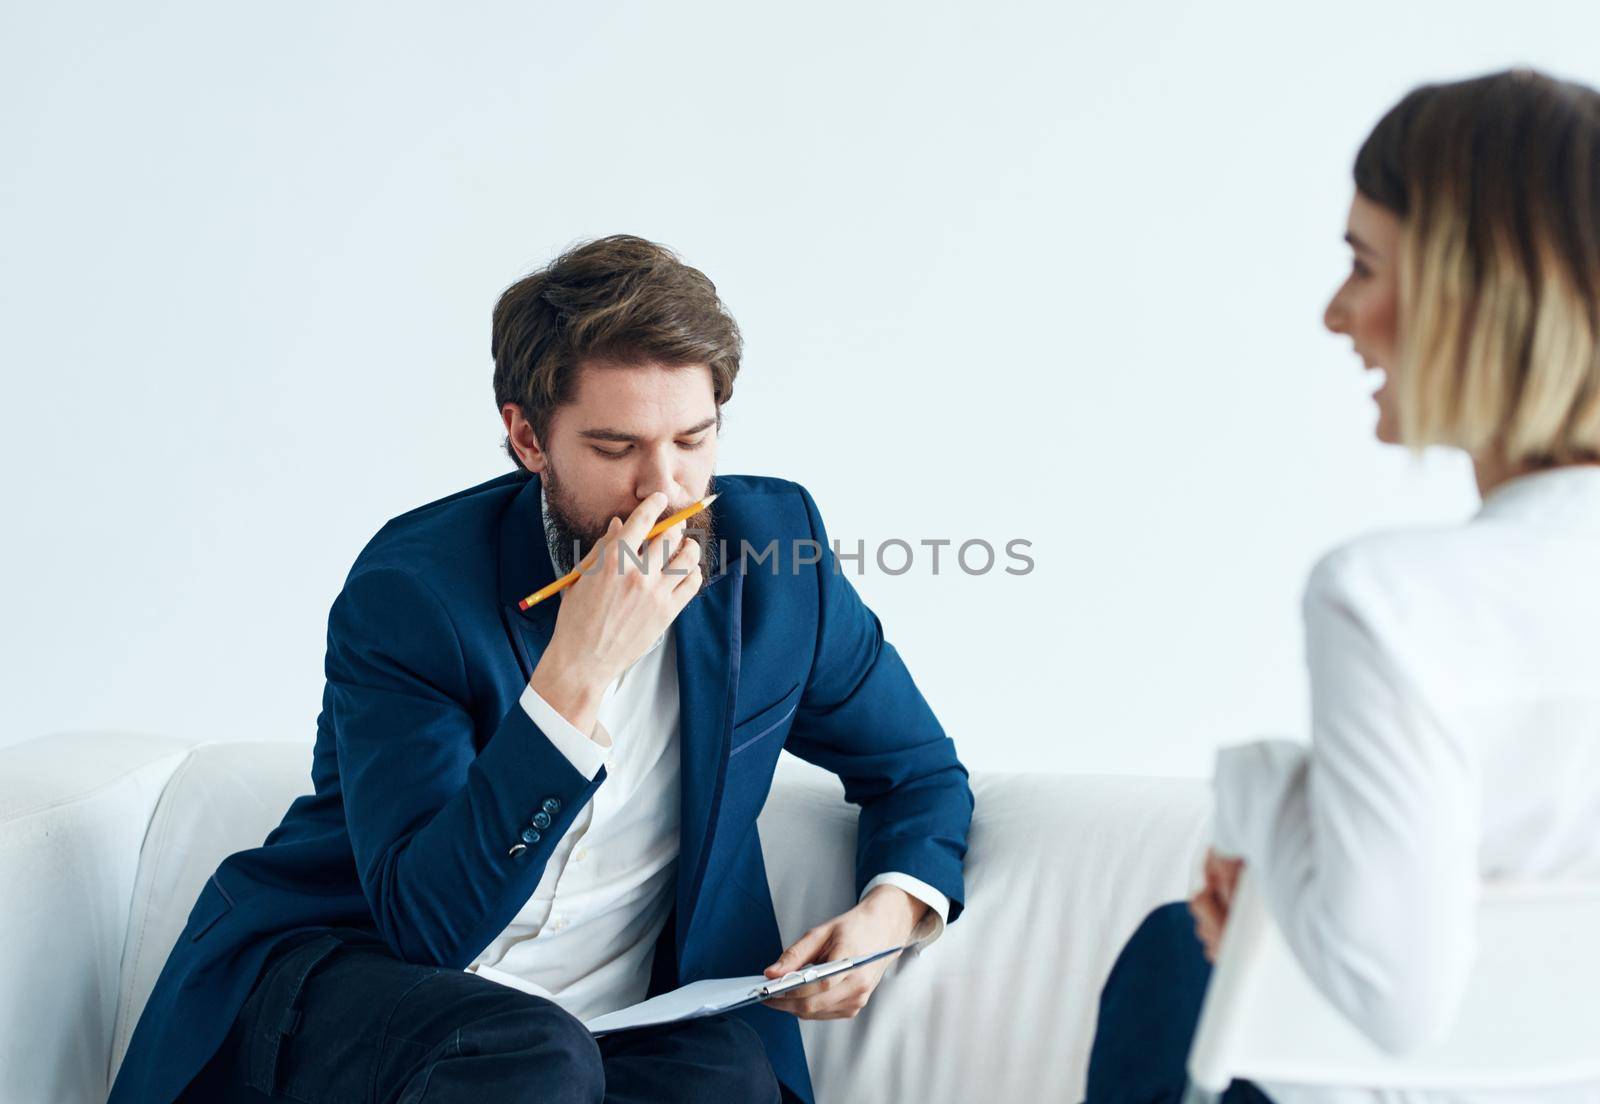 Employees communicate on a light background woman vacancies. High quality photo